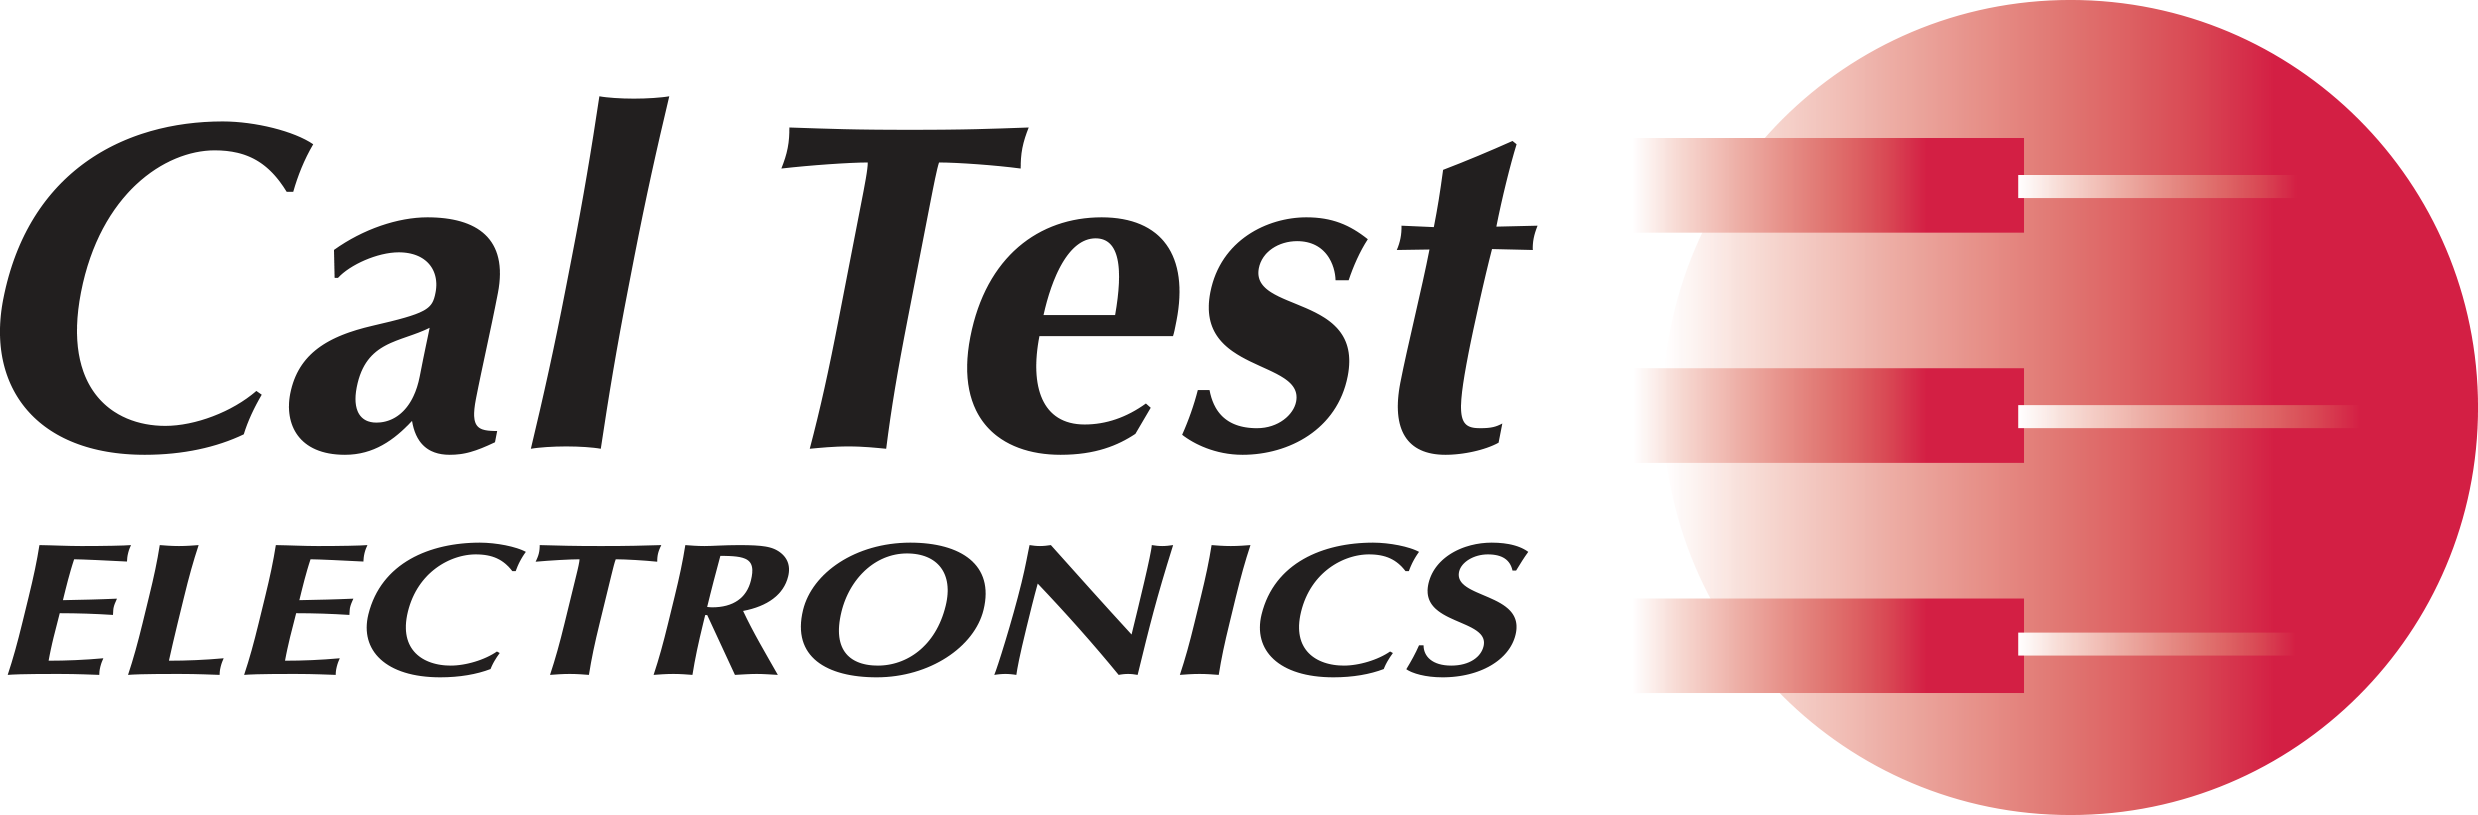 /images/brand/cal-test-electronics.png